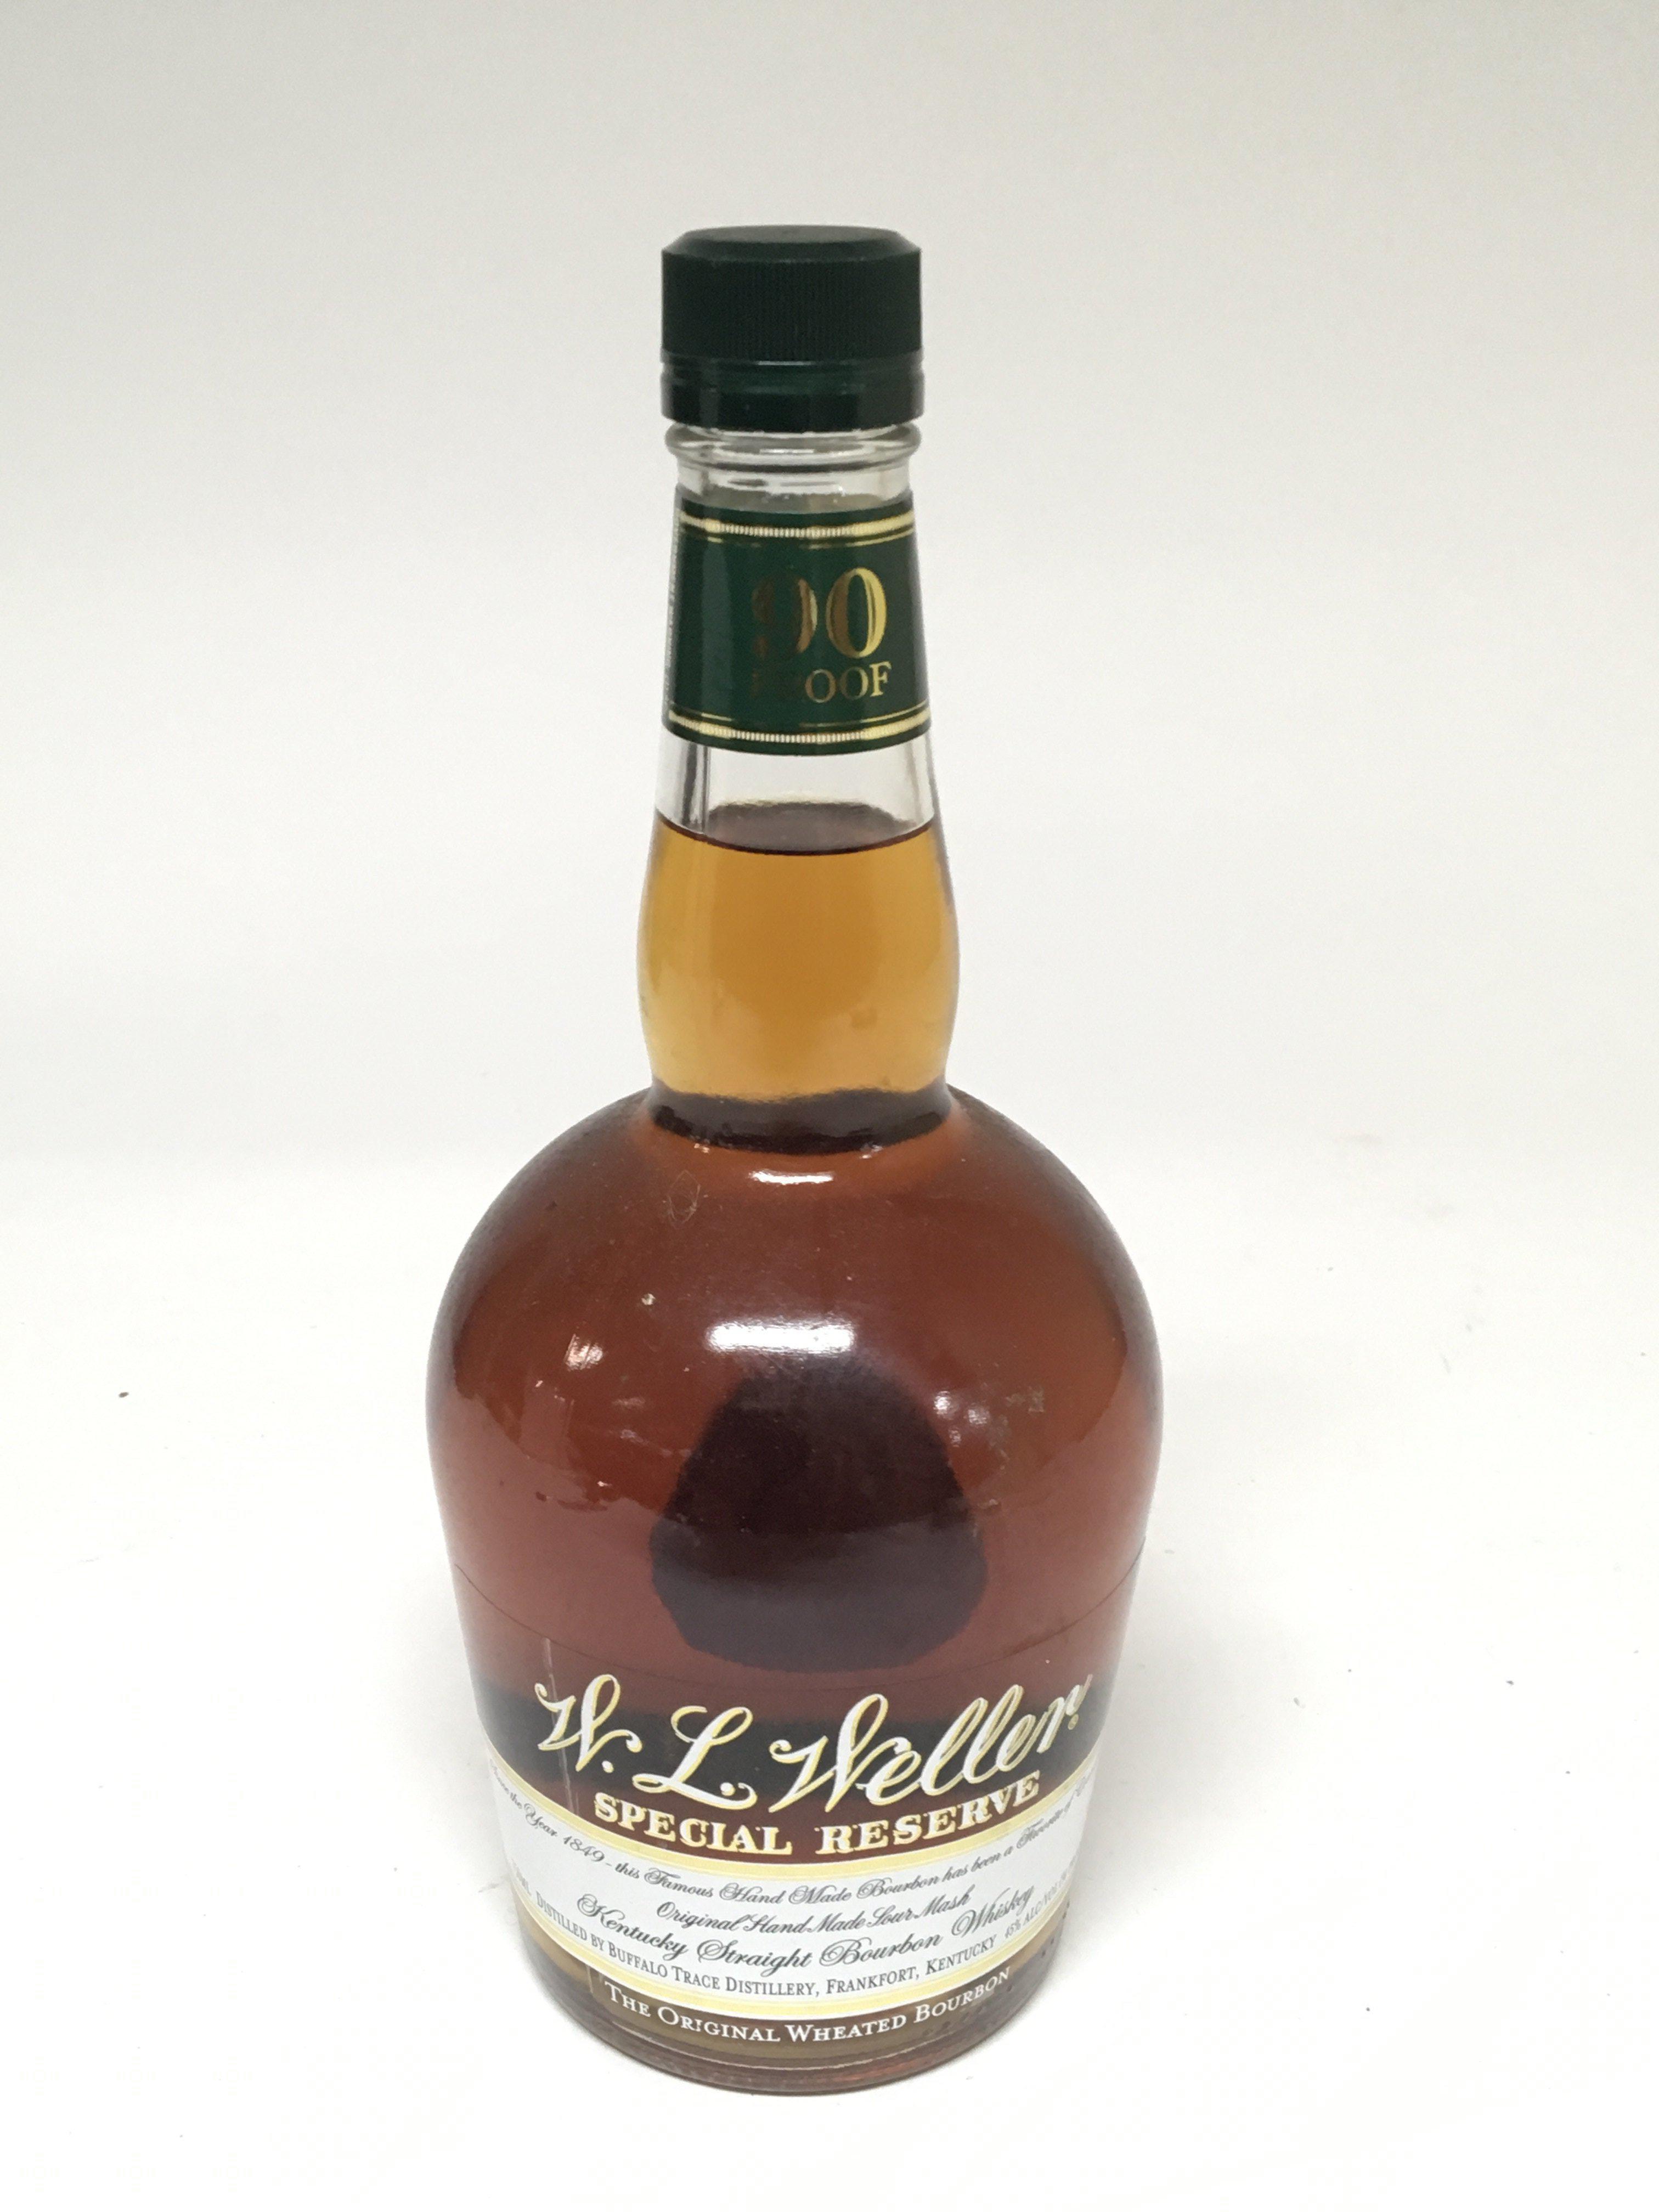 A bottle of W L Weller Special Reserve Bourbon Whisky. 90% Proof 750ml.